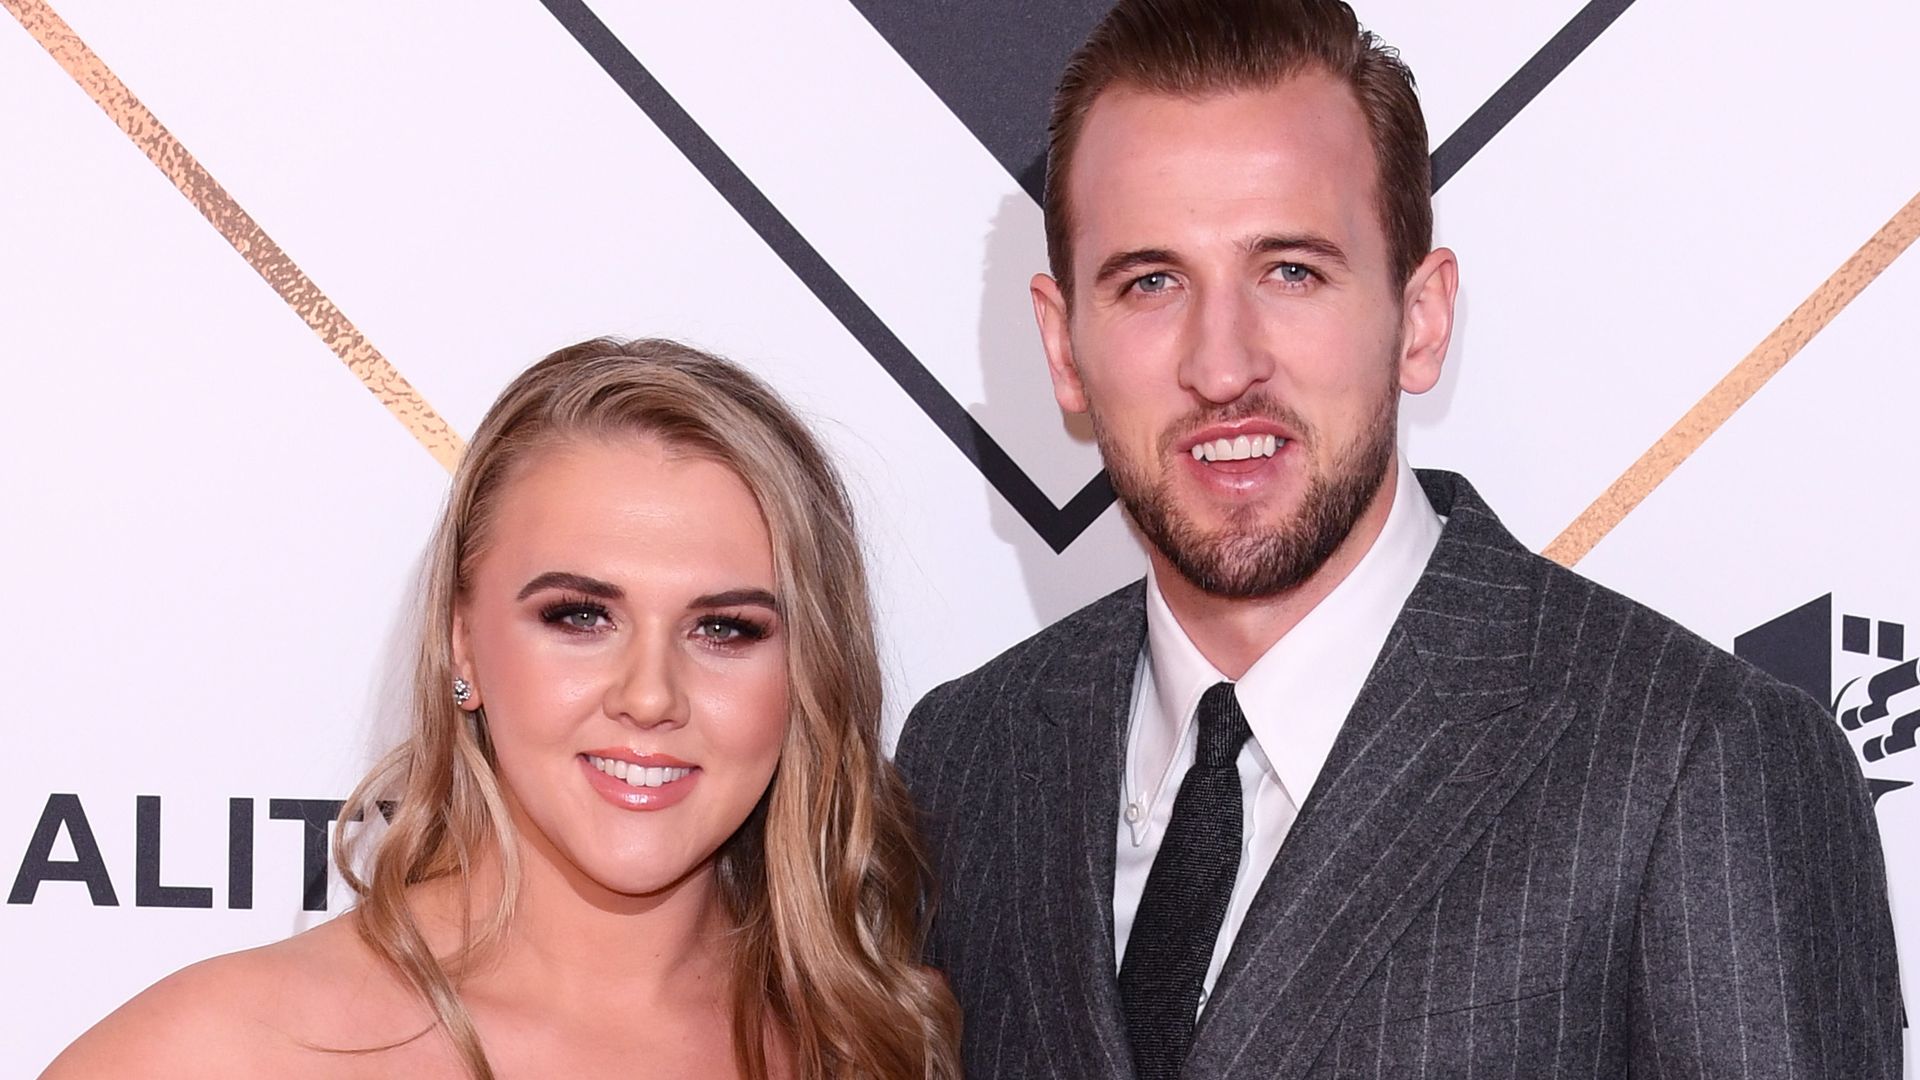 Harry Kane in a grey suit with his wife Kate in a black dress